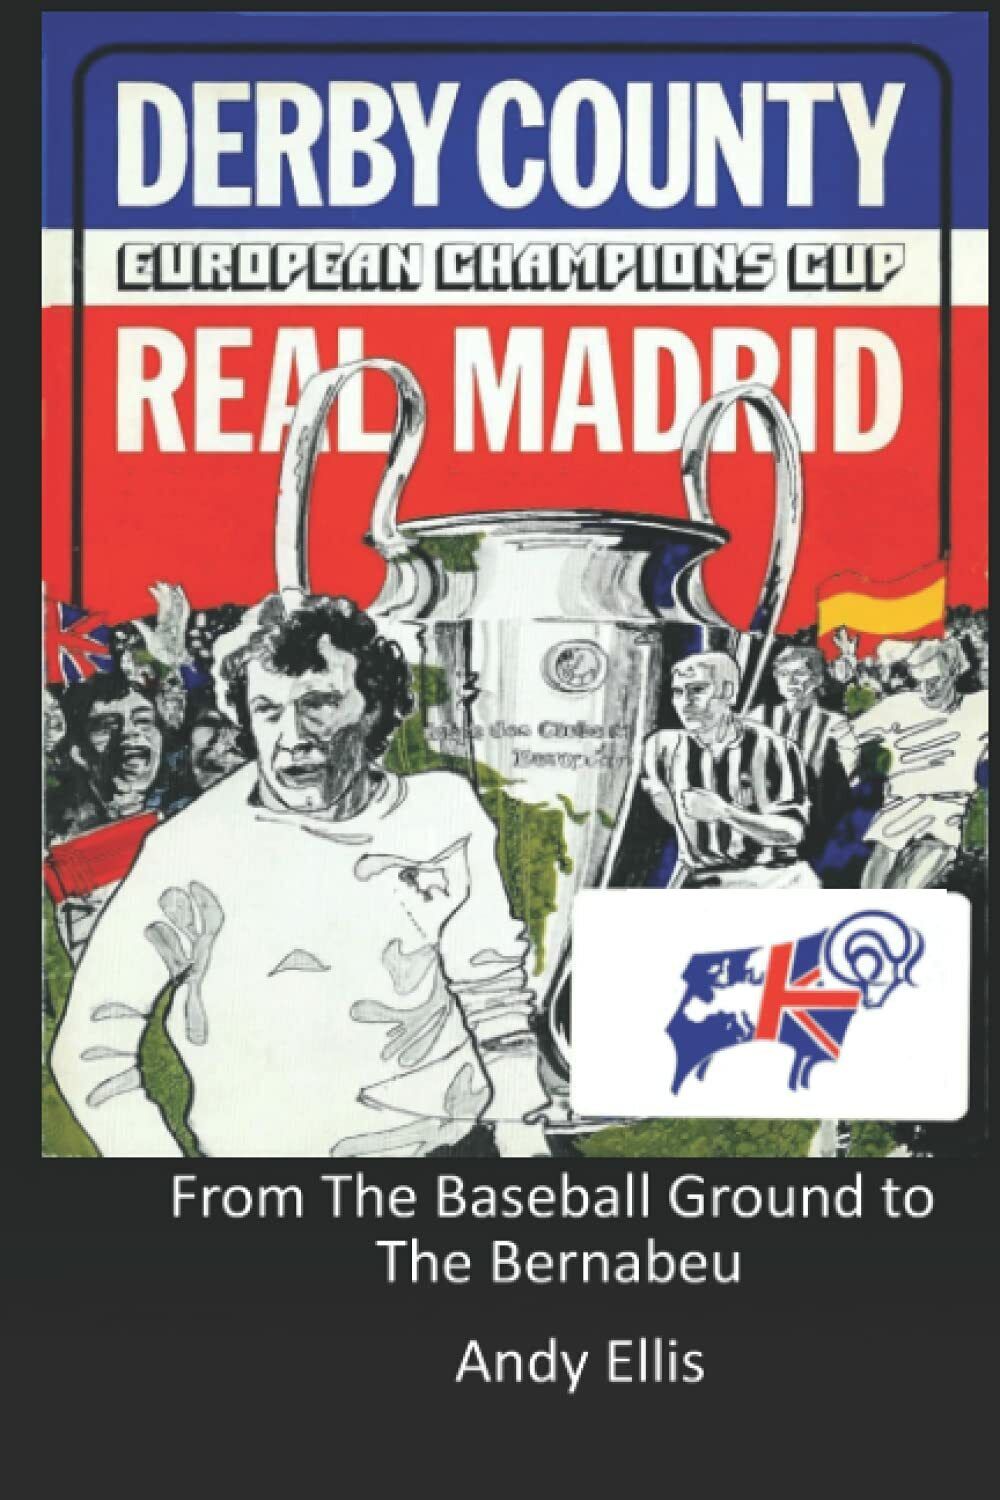 From the Baseball Ground to the Bernabeu-Andy Ellis-Independently published,2021